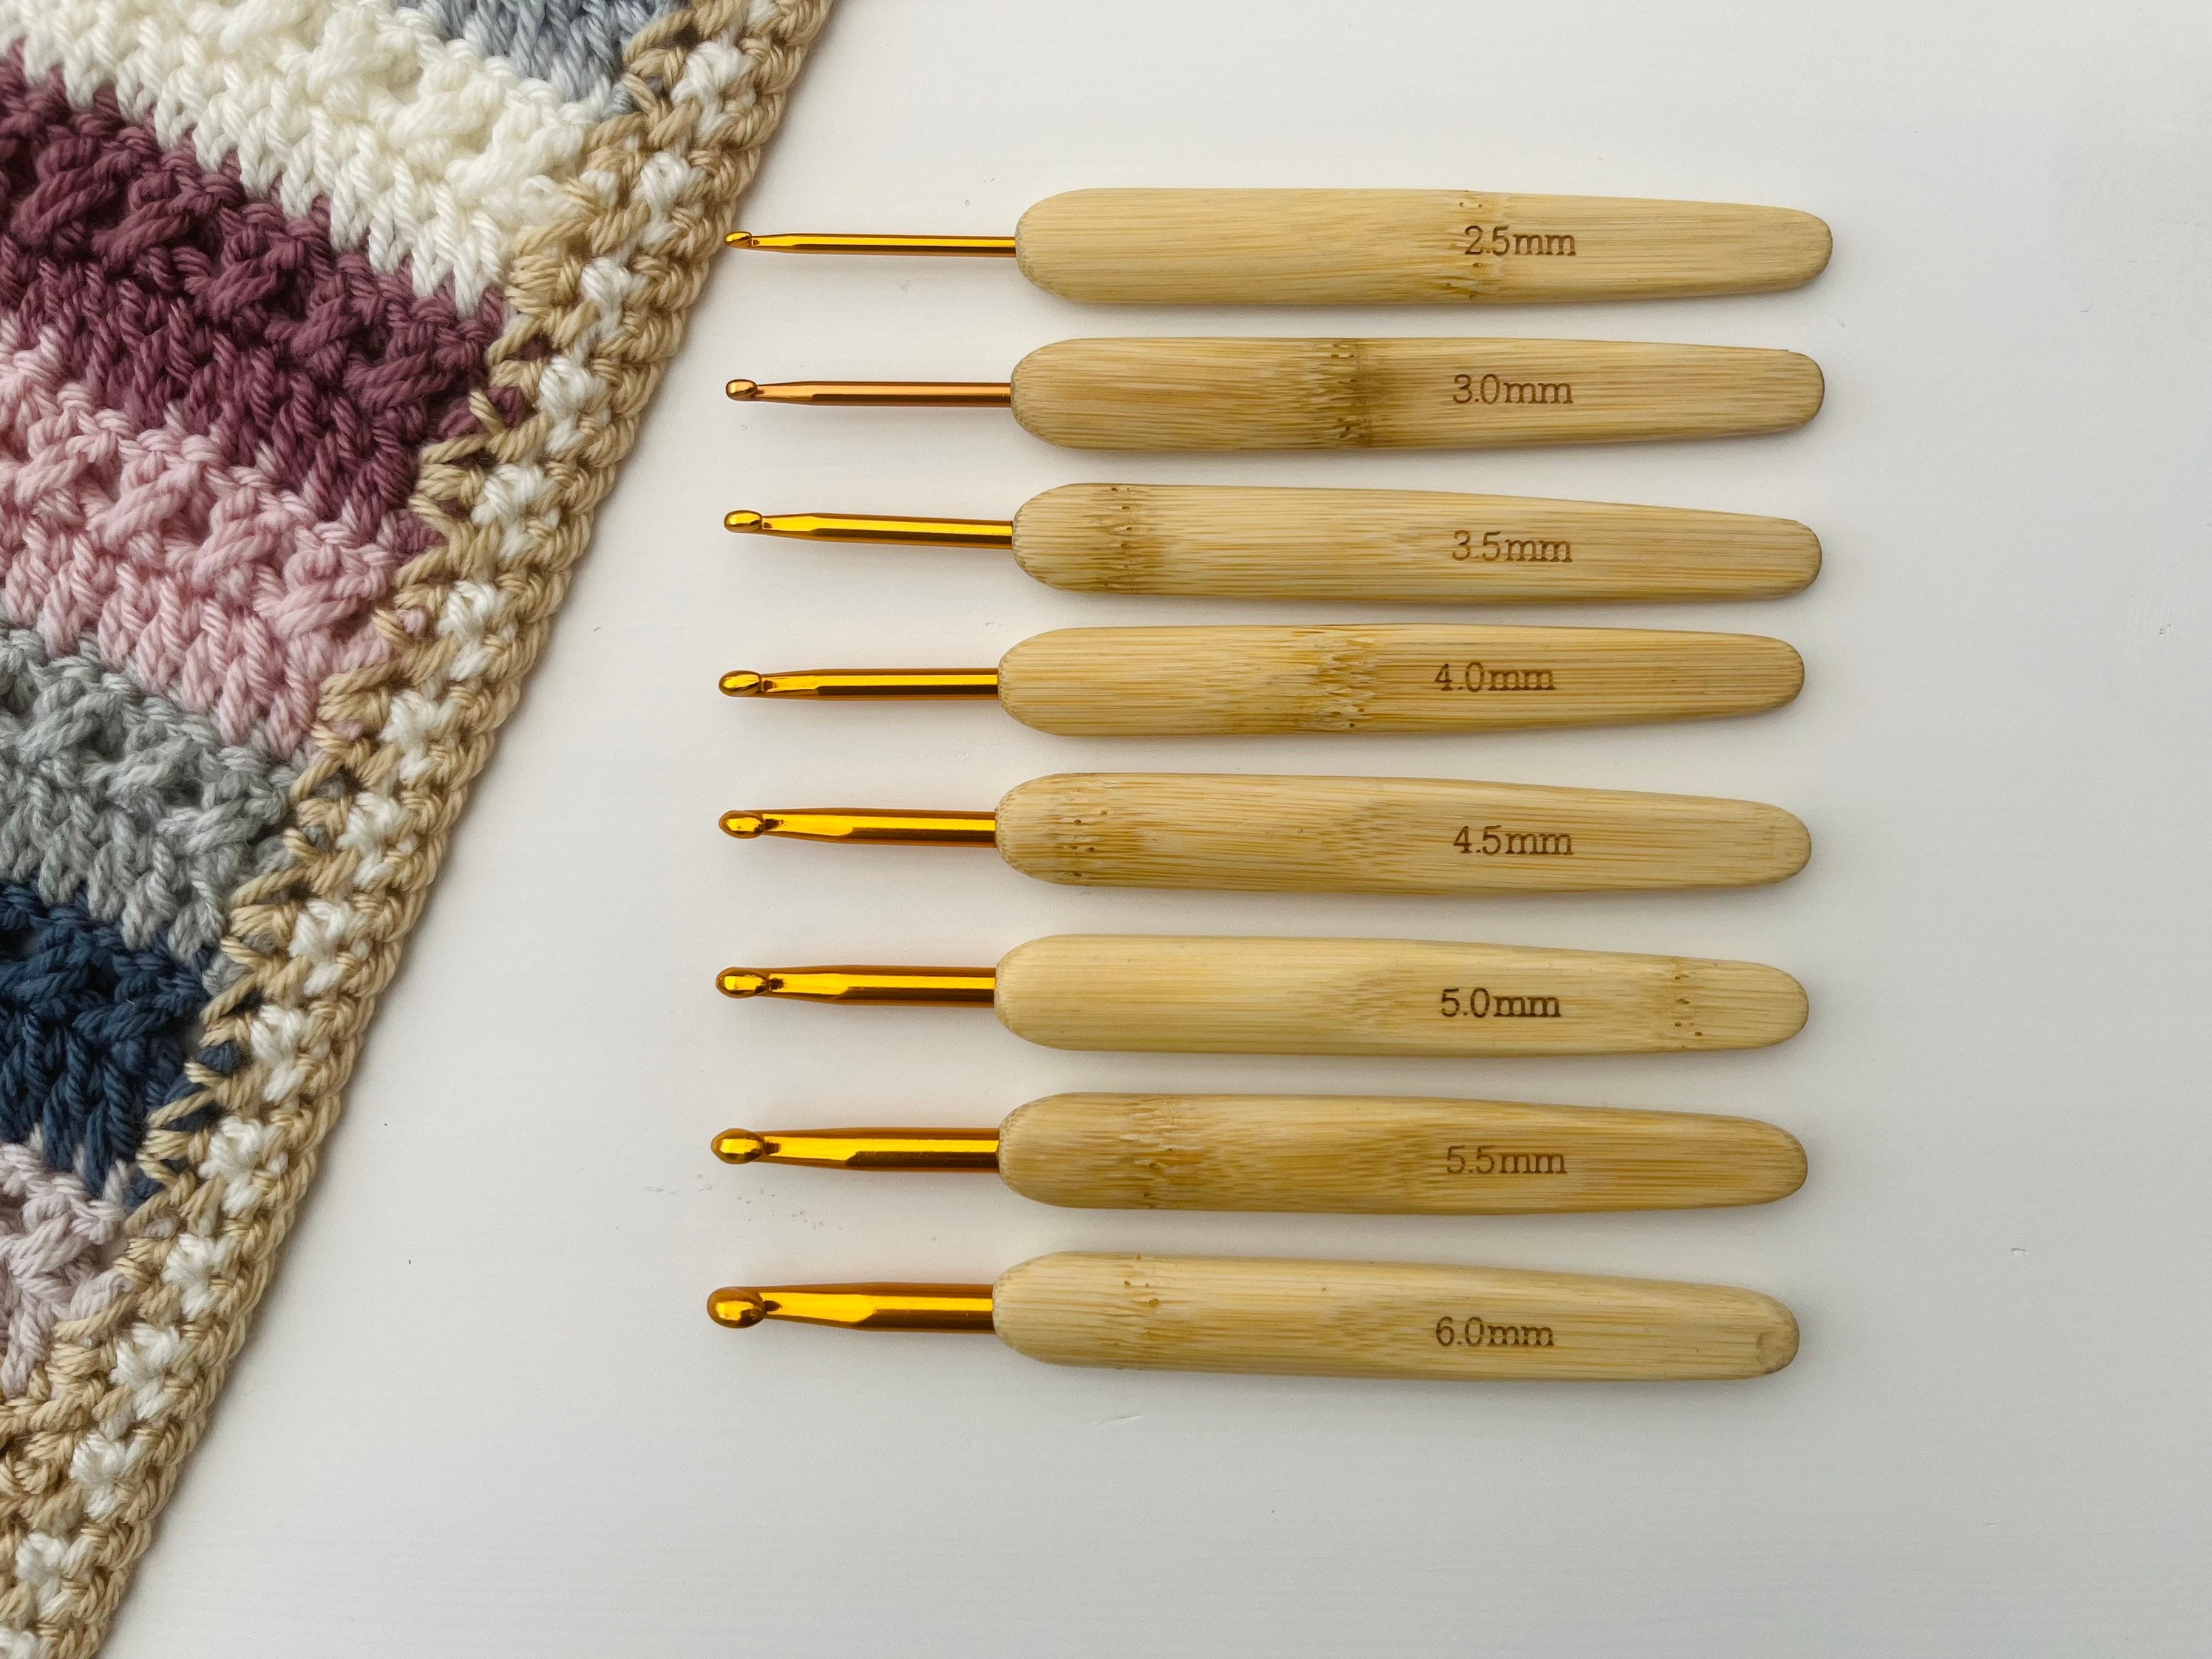 Bamboo Crochet Hook Set with Case from Crystal Palace